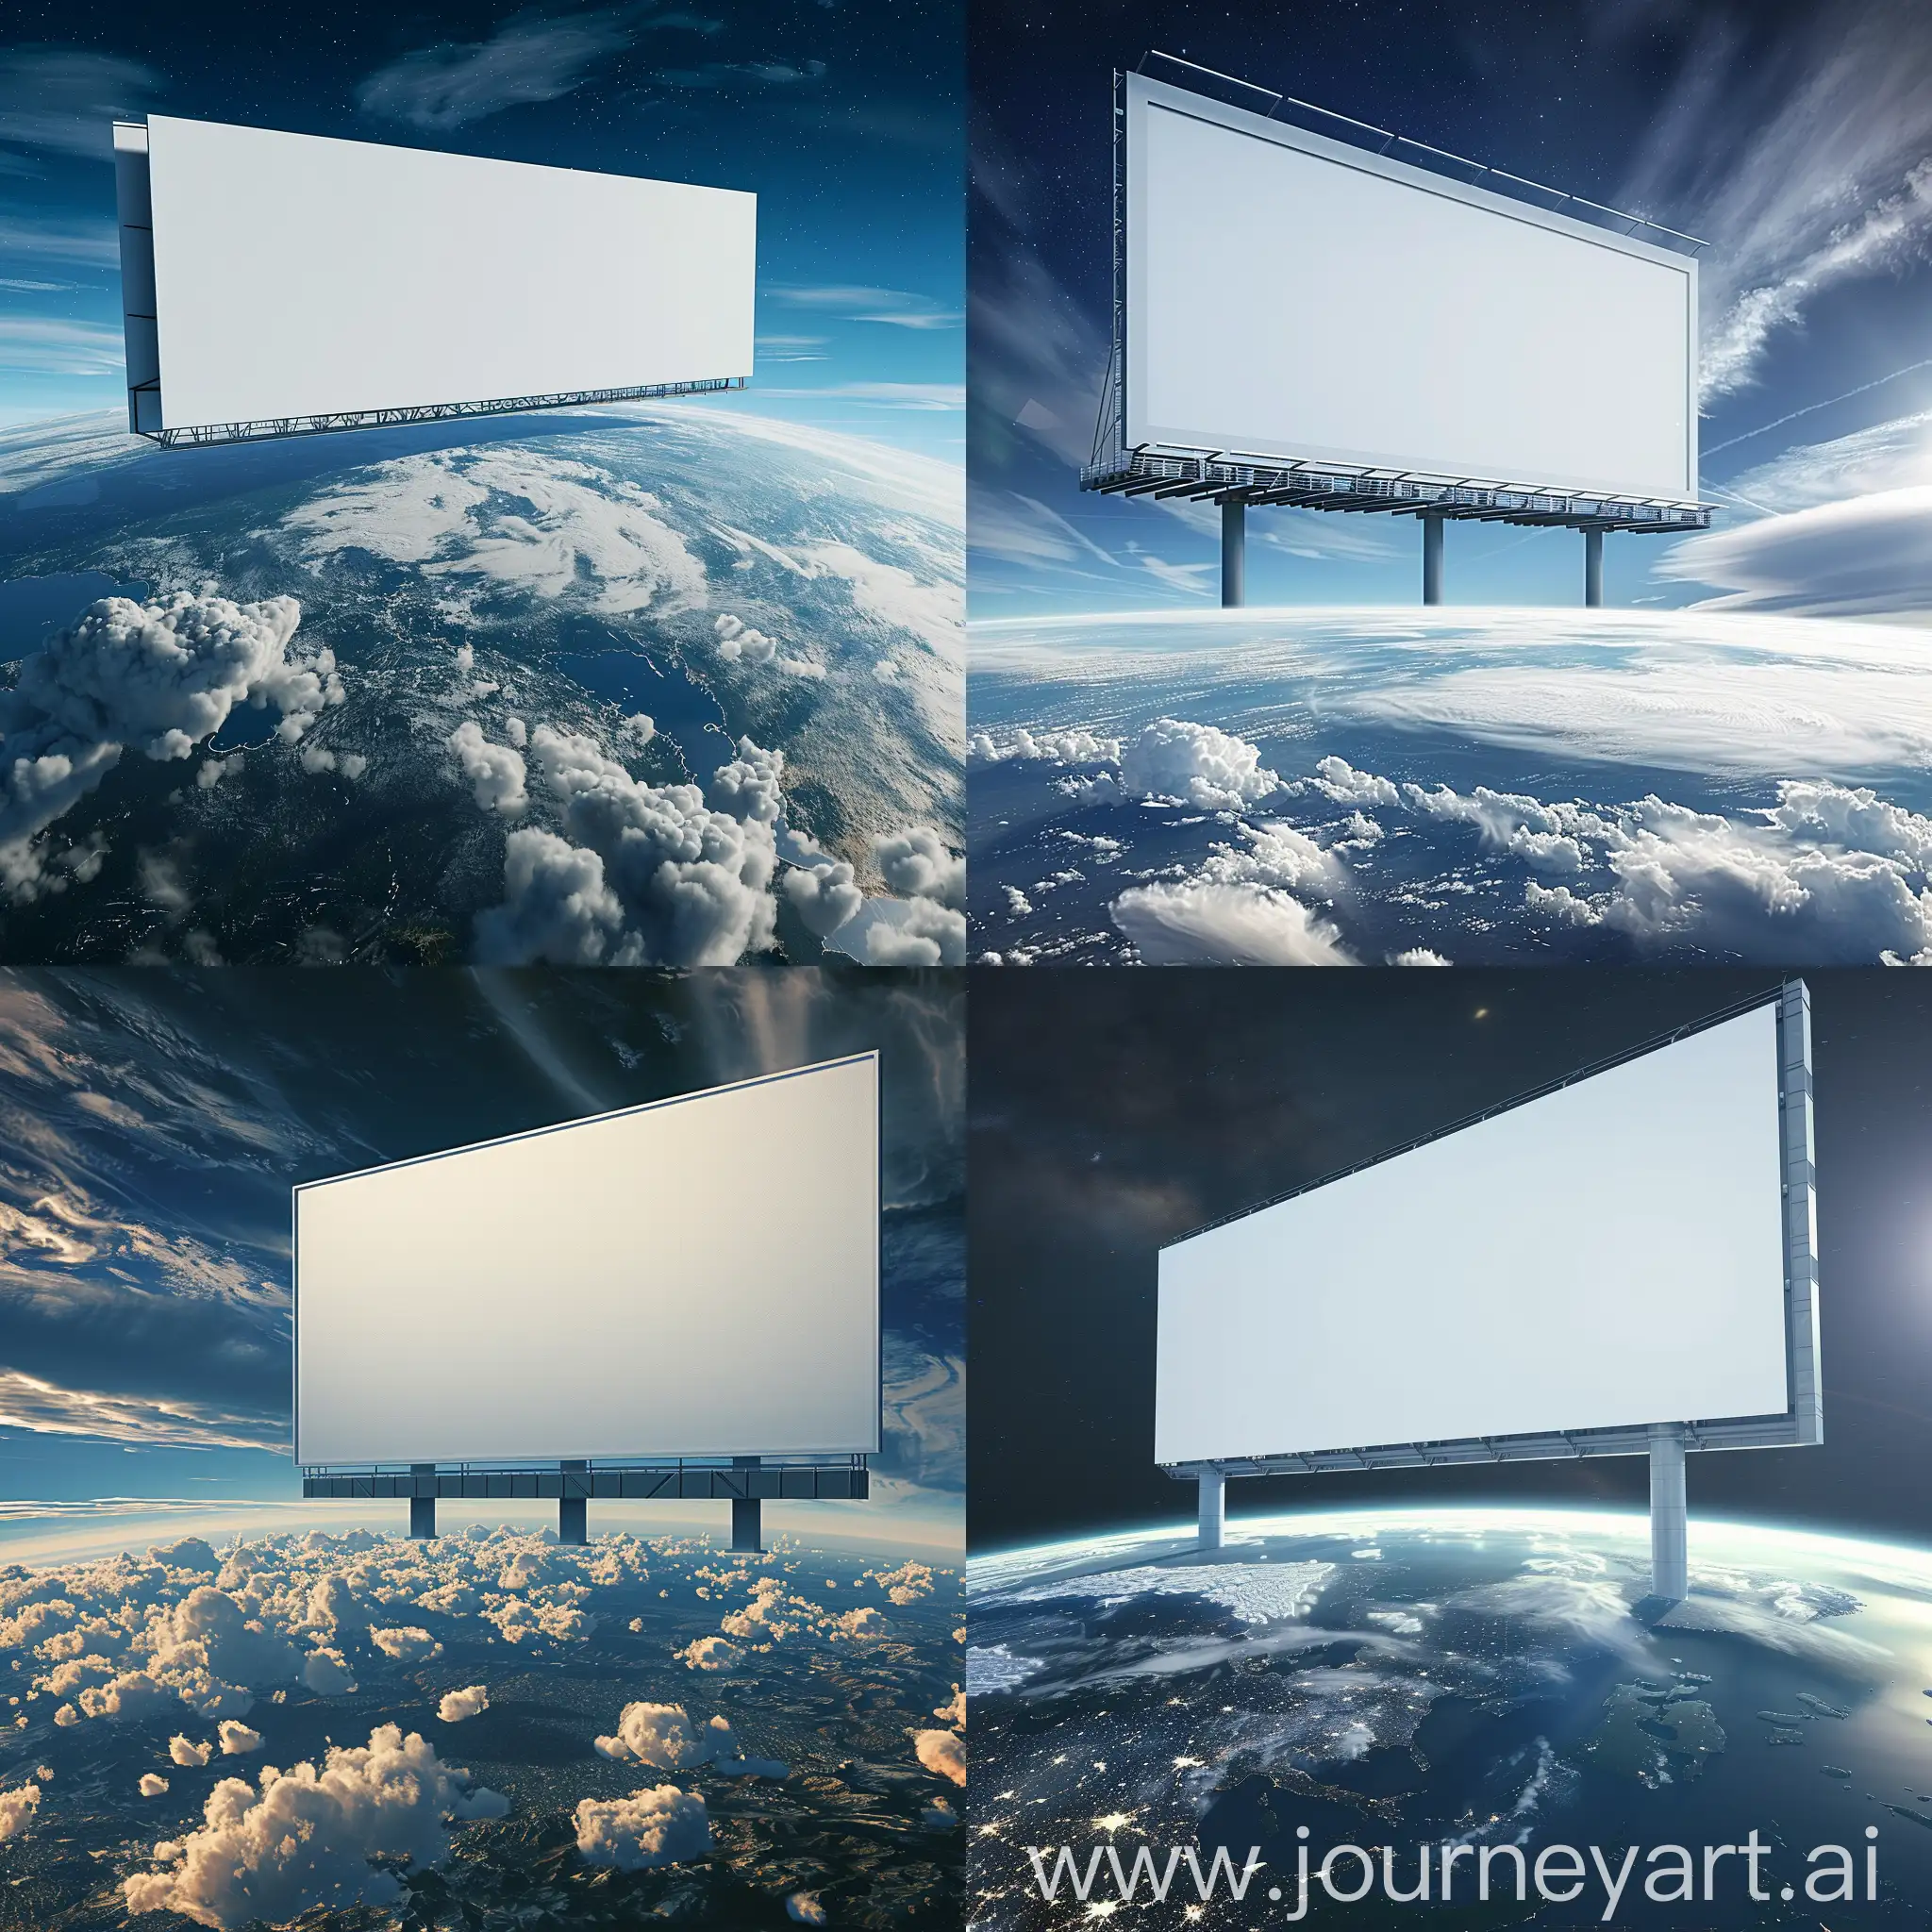 Enormous-Earth-Billboard-Photorealistic-Advertisement-Space